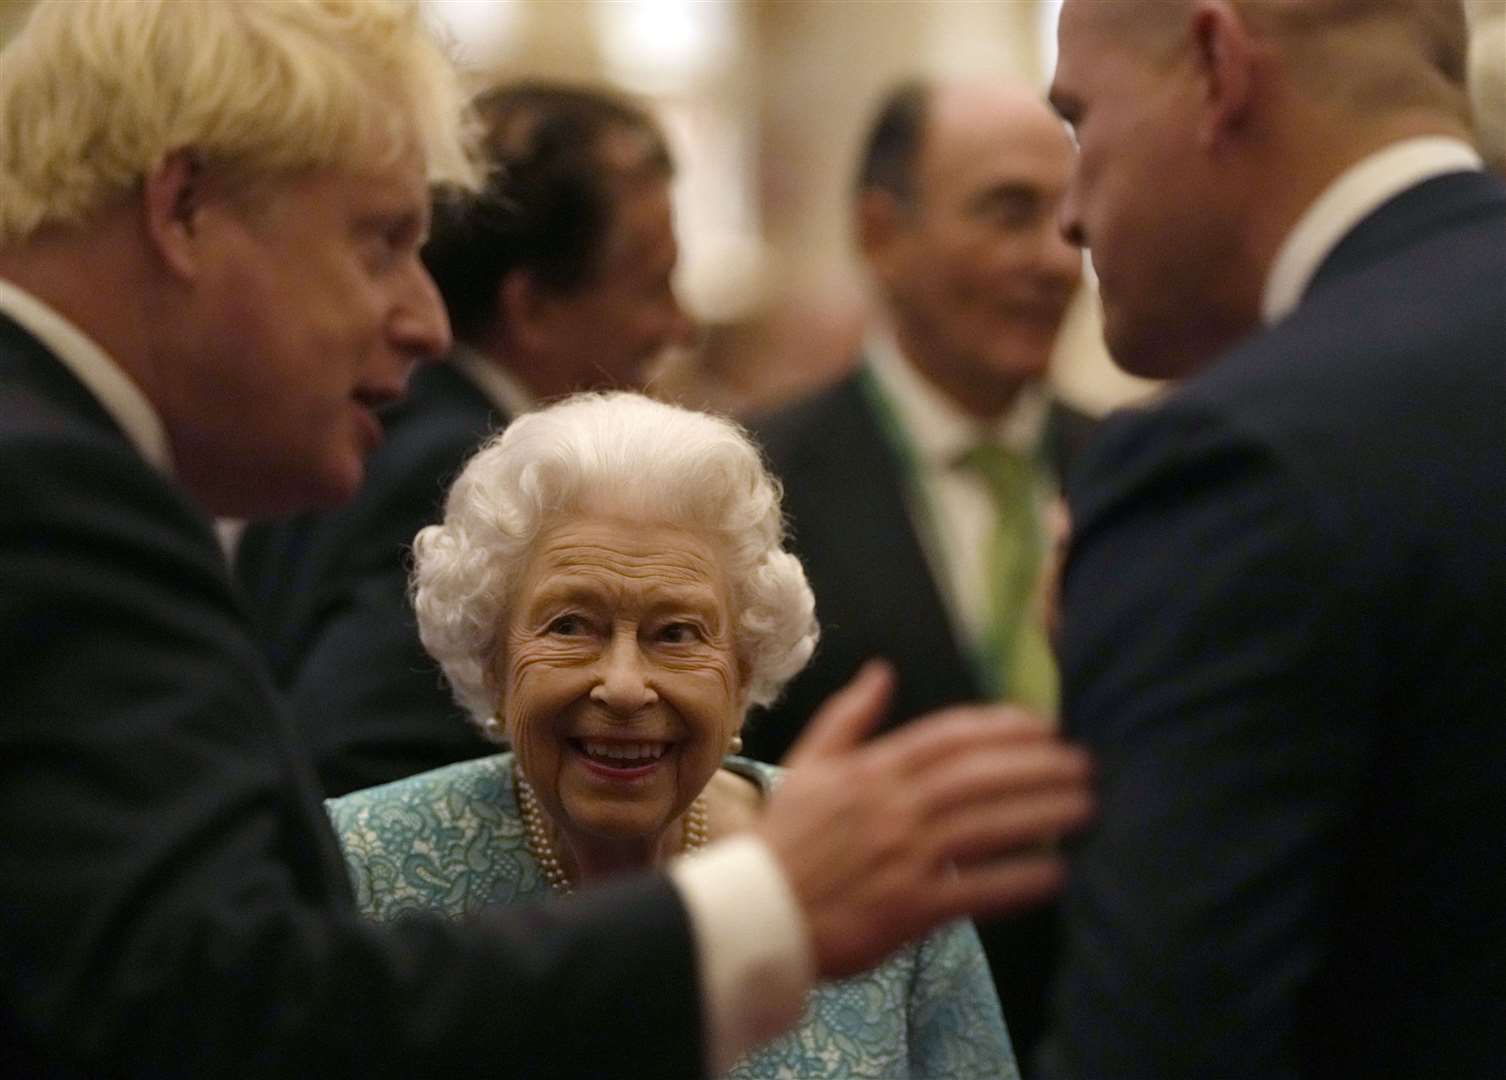 The Queen with Prime Minister Boris Johnson during a reception for delegates of the Global Investment Conference at Windsor Castle on Tuesday (Alastair Grant/PA)